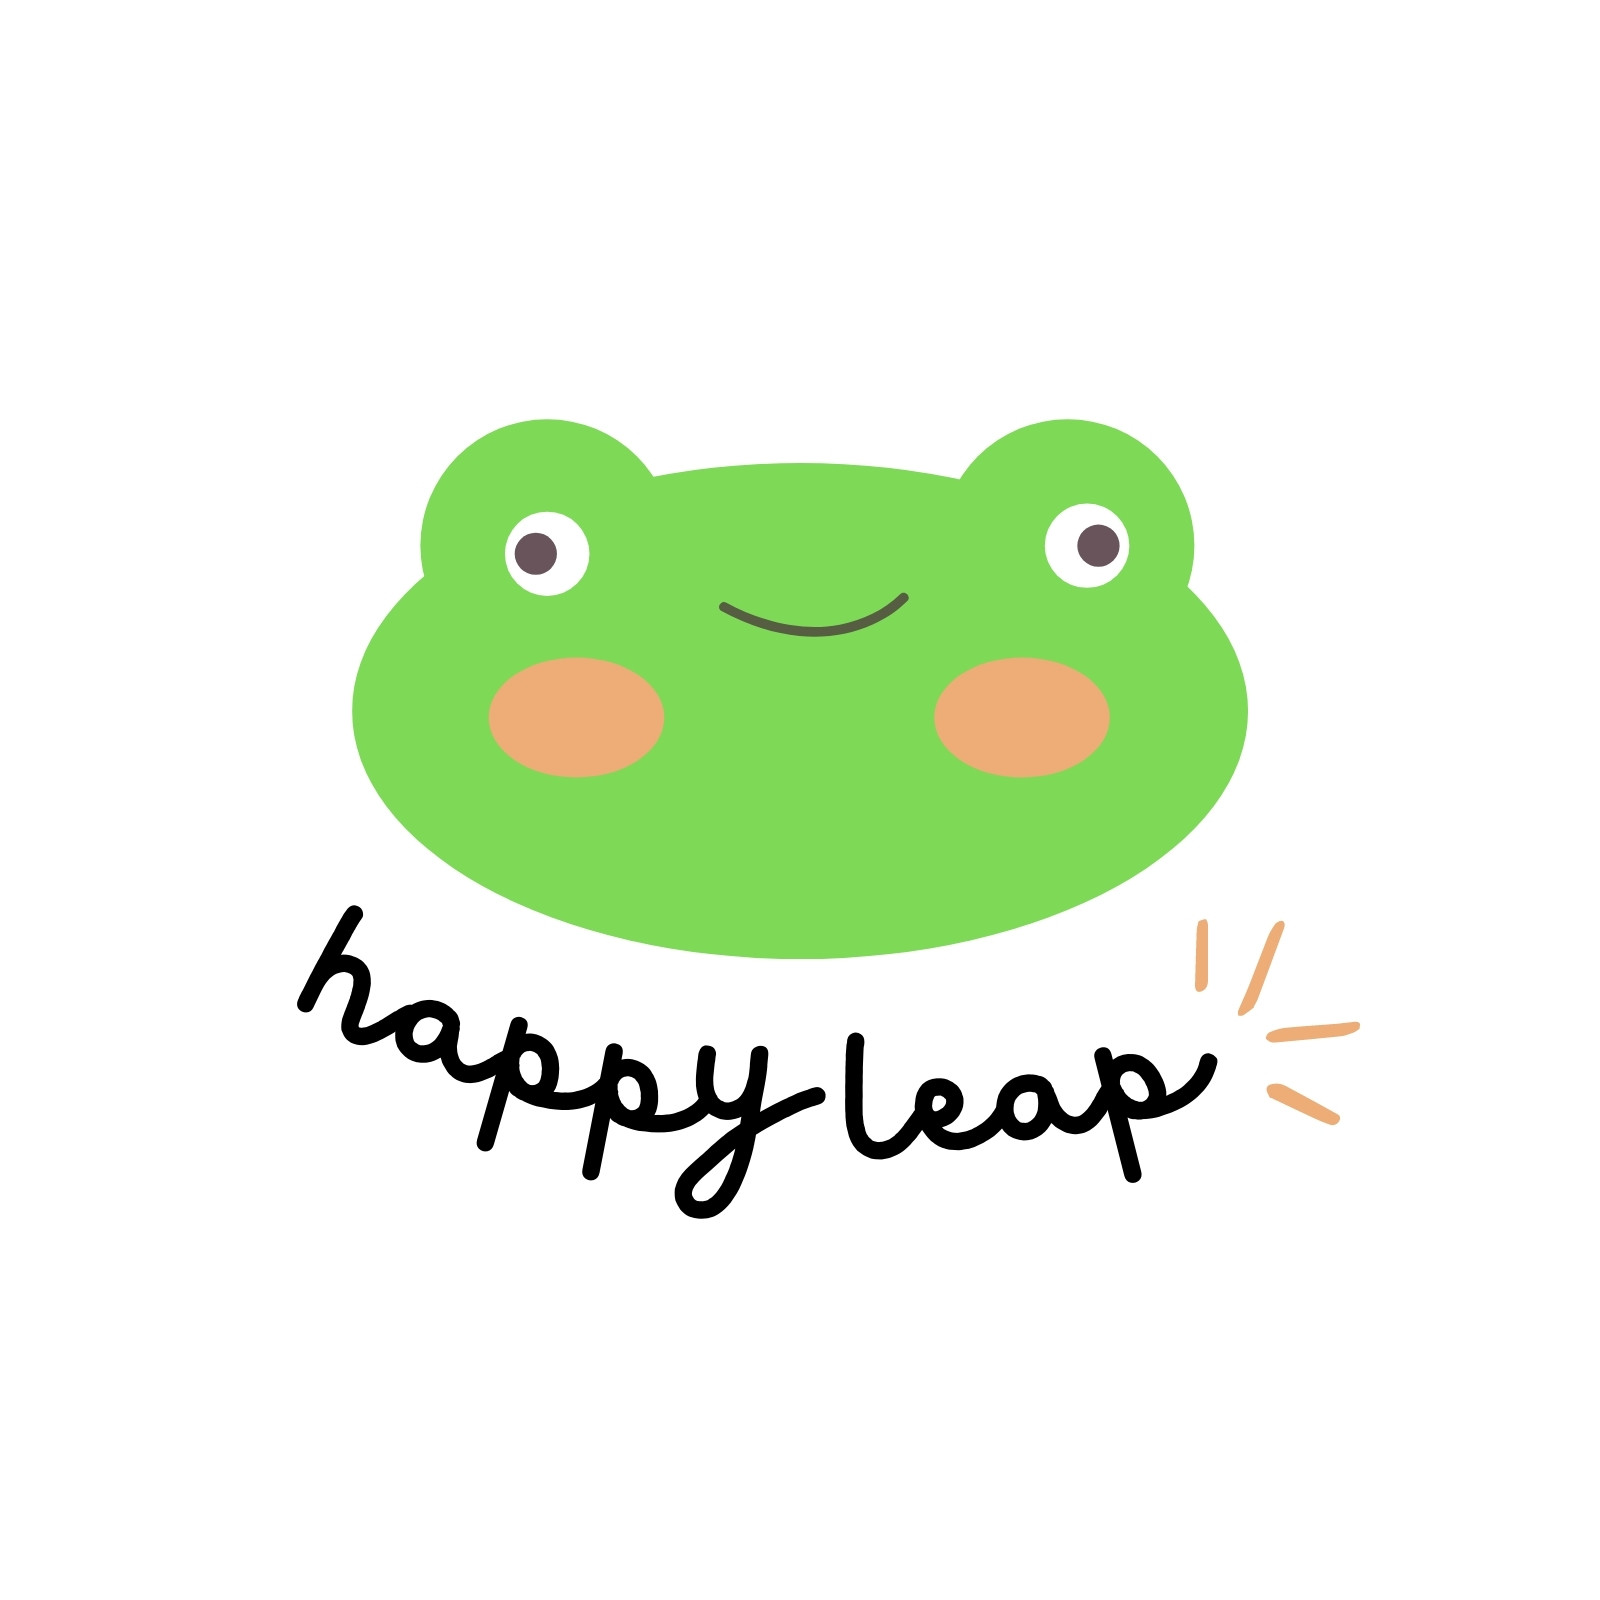 Free and customizable frog templates